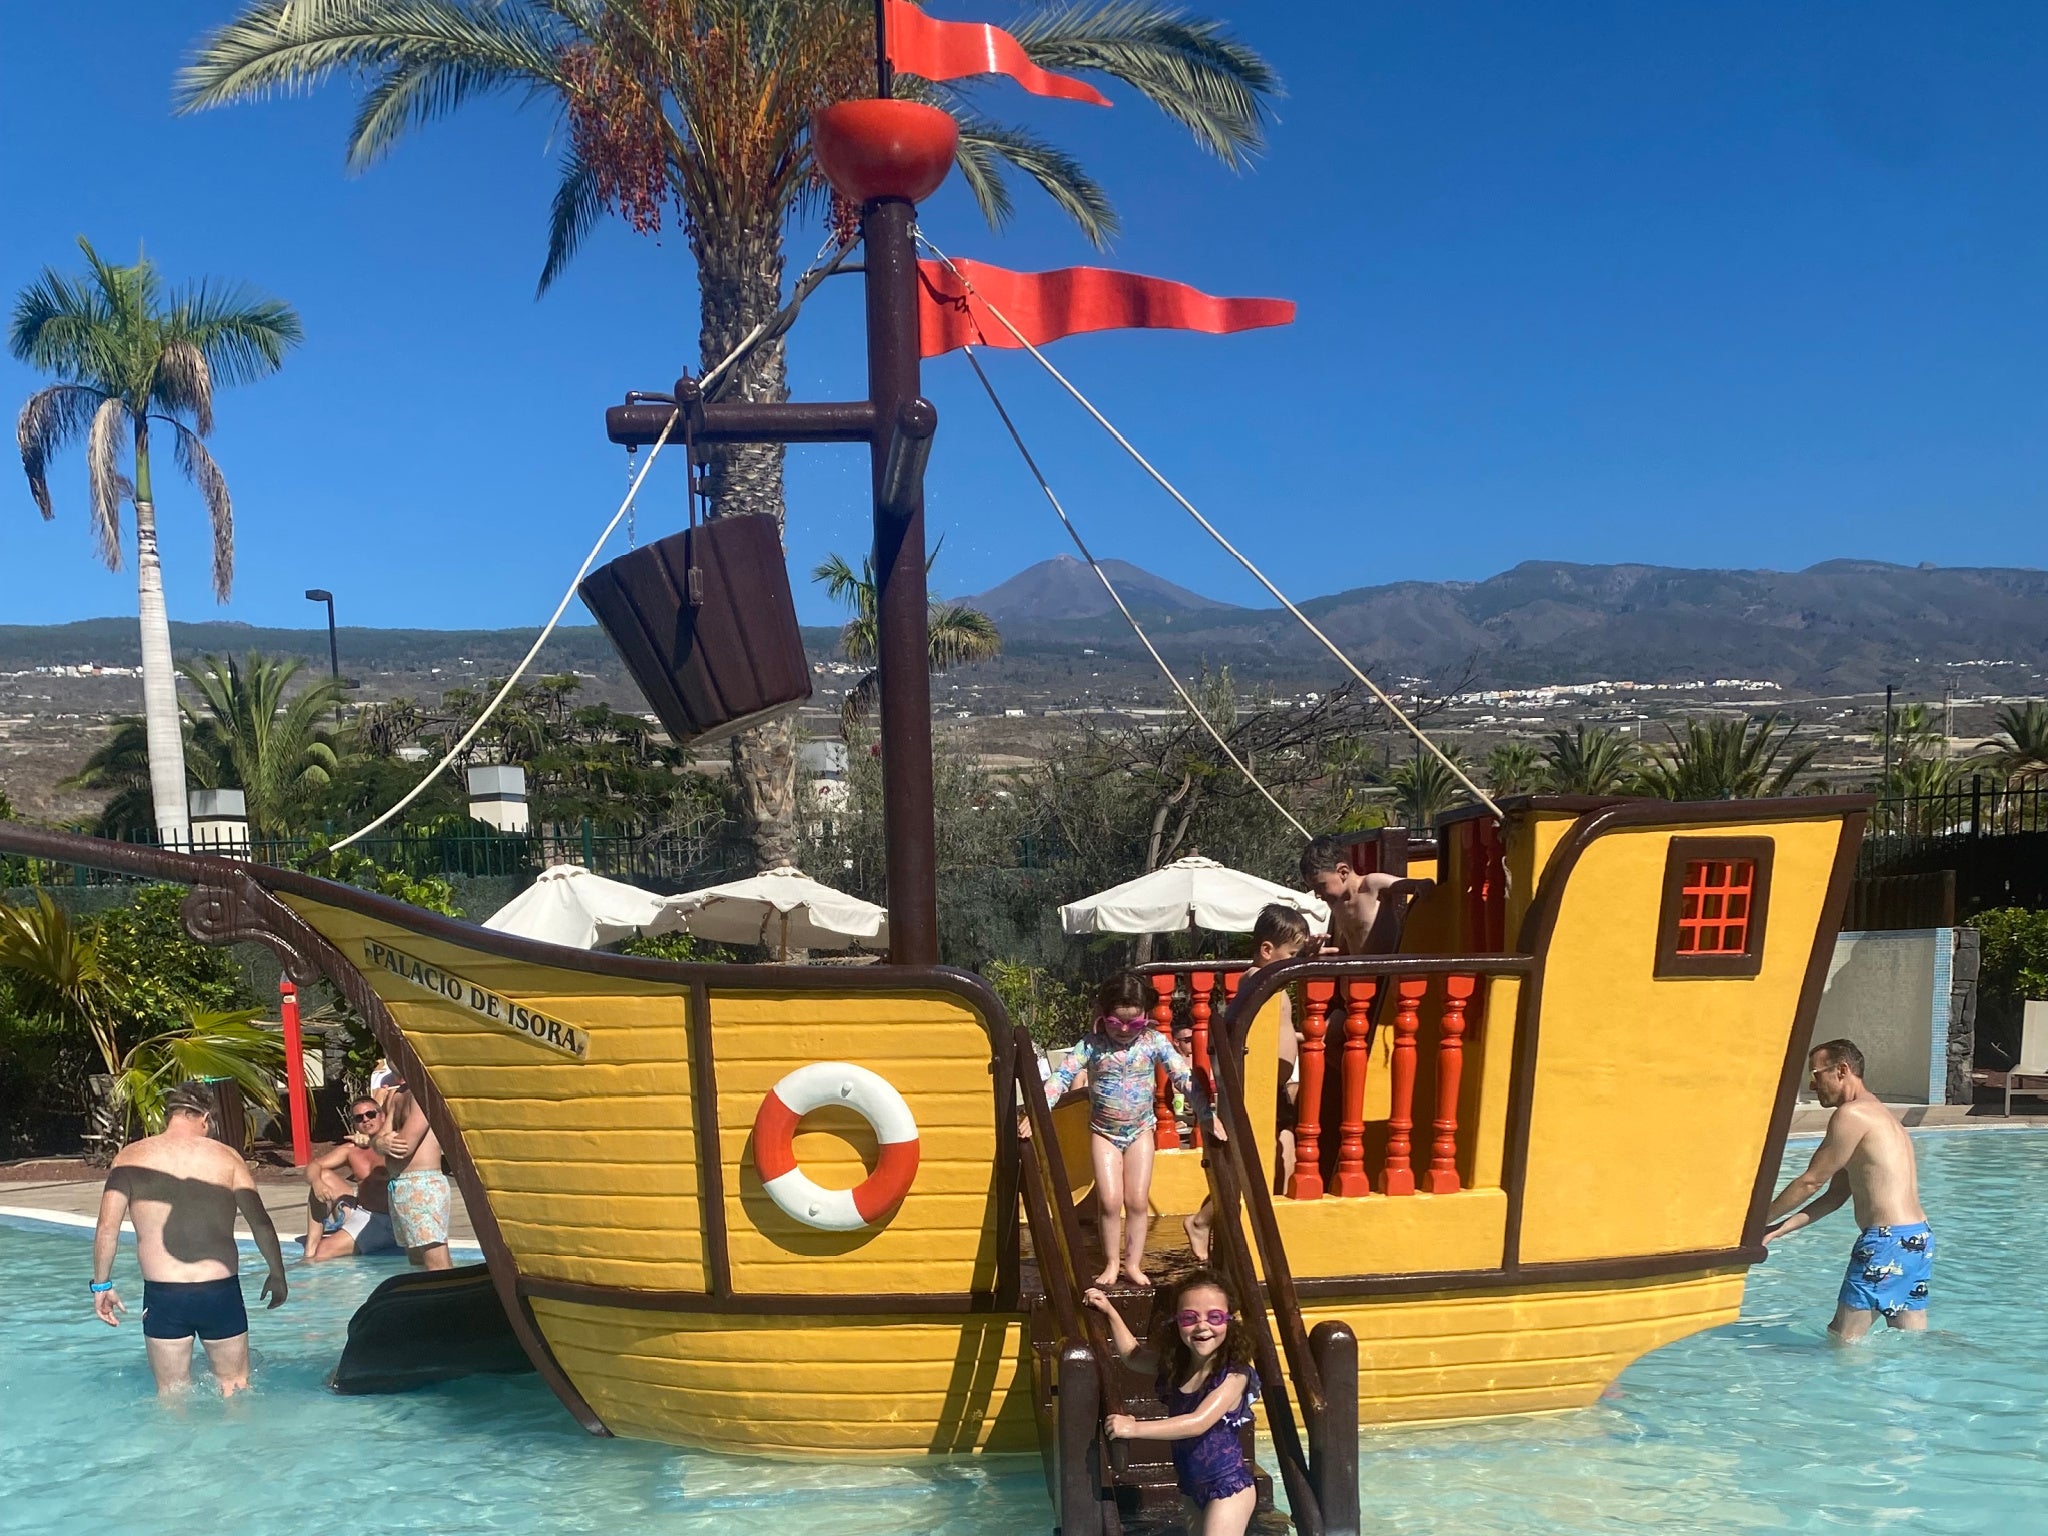 Ahoy mini adventurers: Tenerife’s climate allows for water play every day